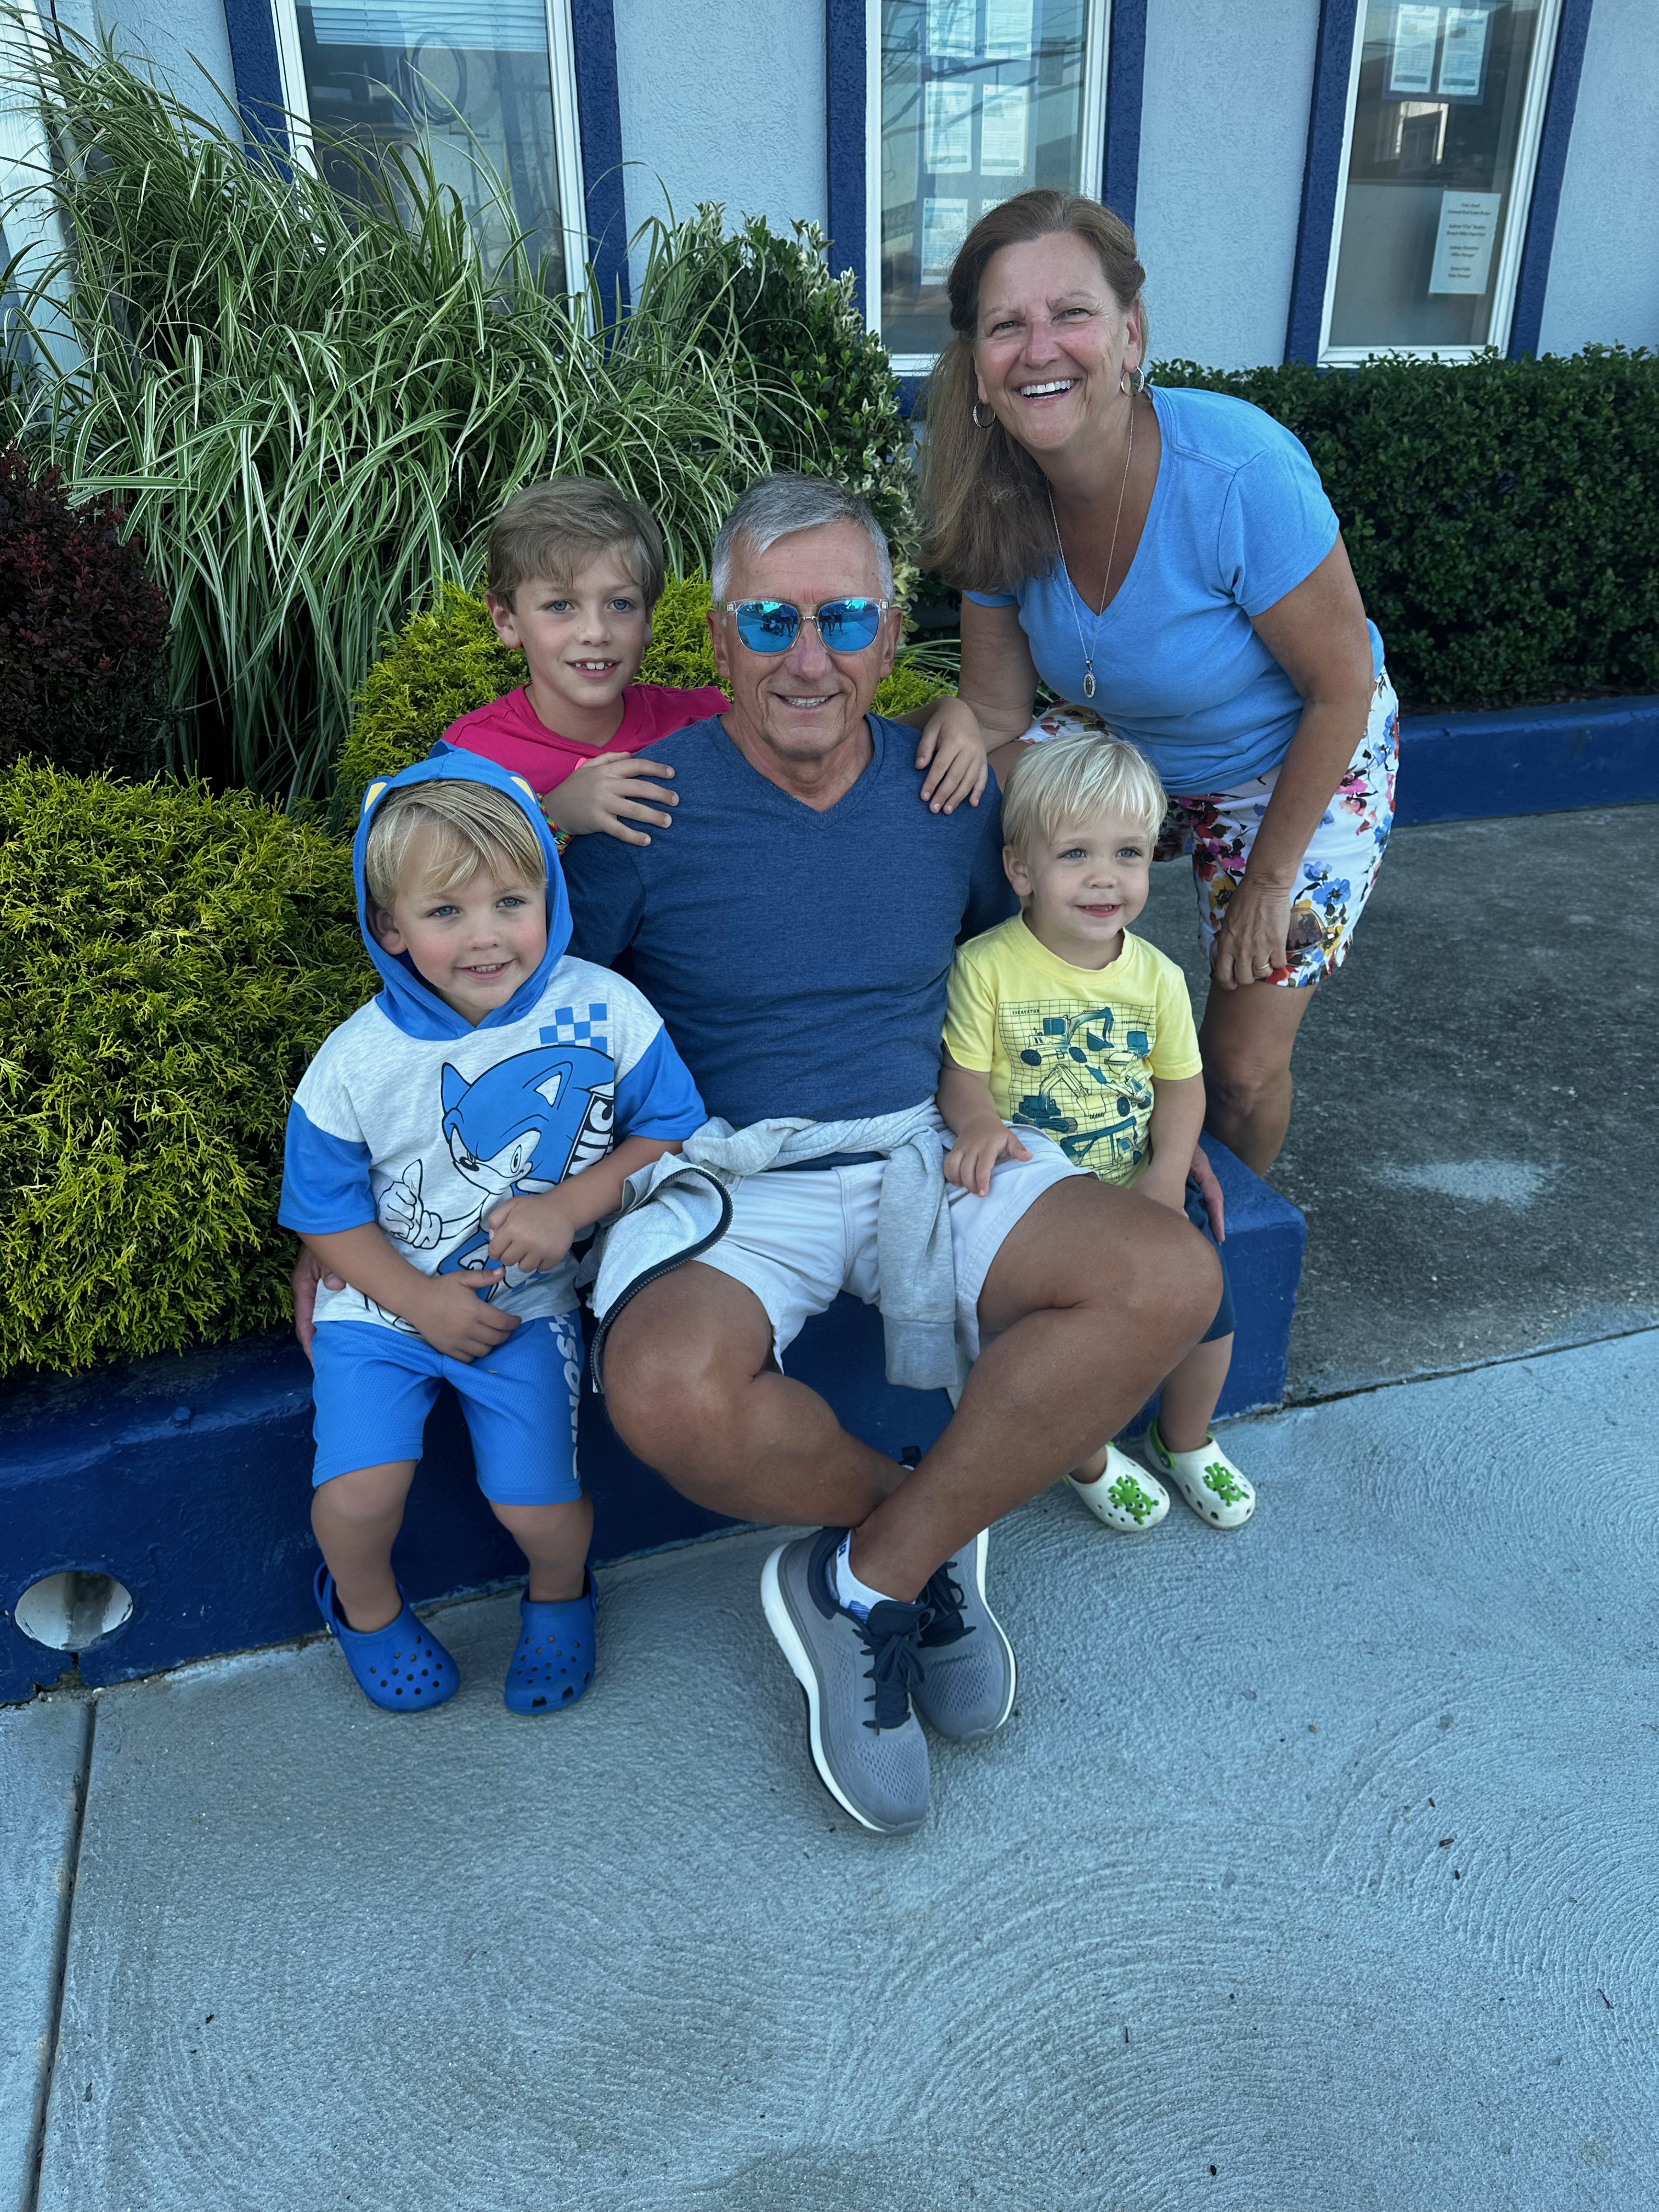 Proud grandparents with “The Grand Boys” on vacation in Ocean City, NJ.